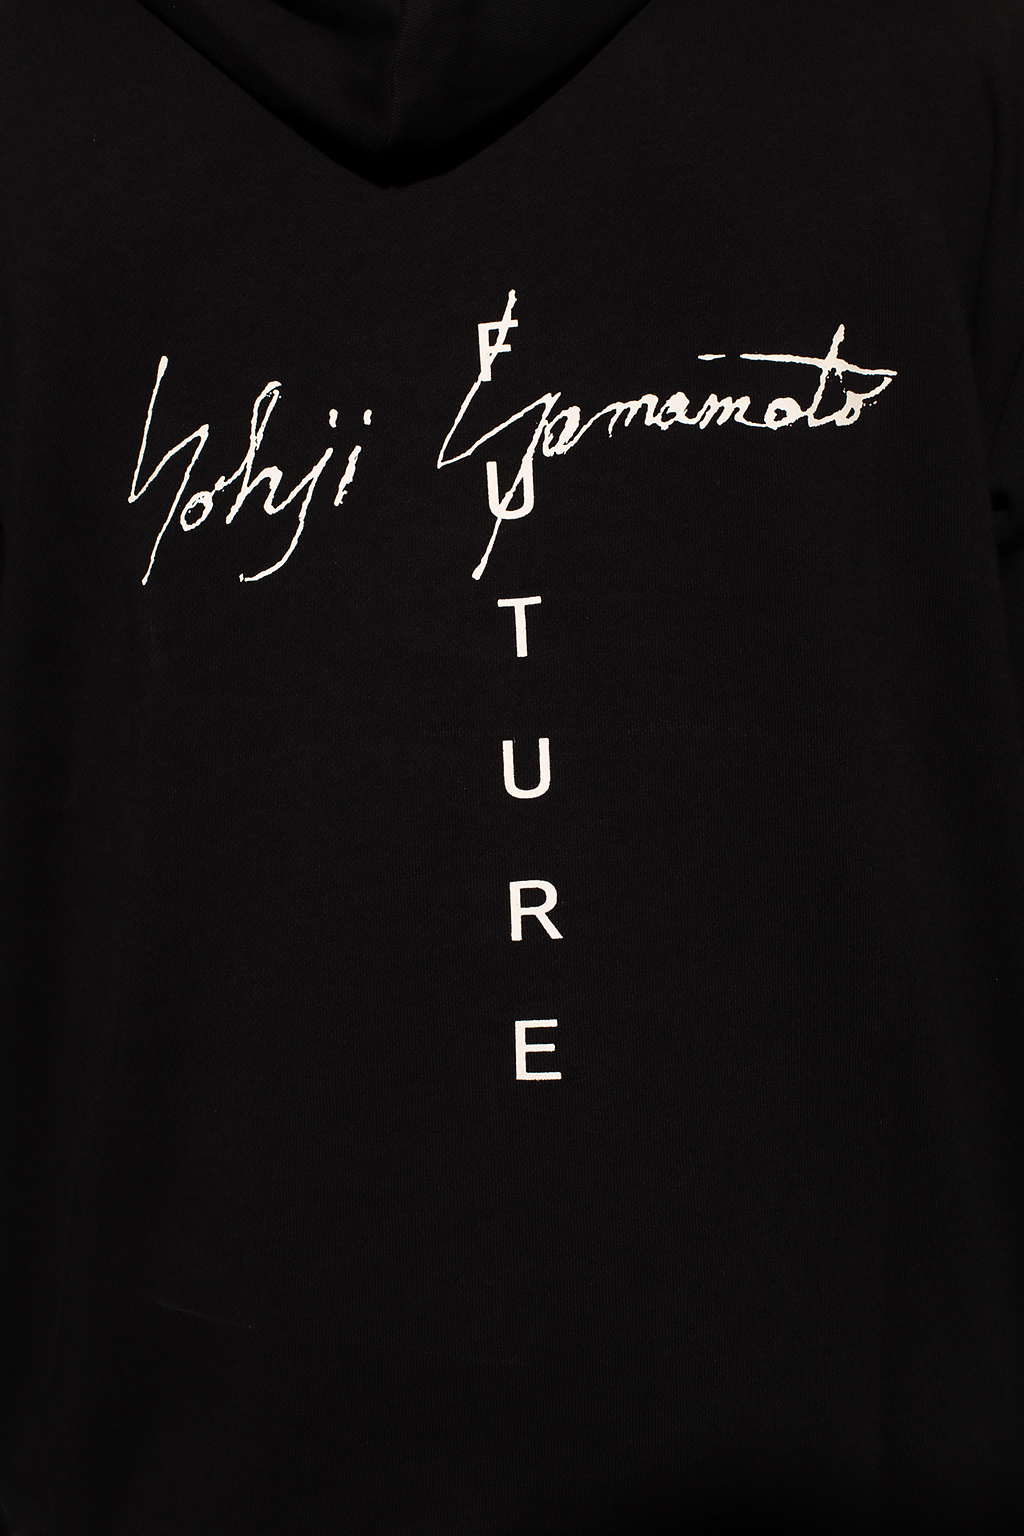 Yohji Yamamoto that will serve you for years to come